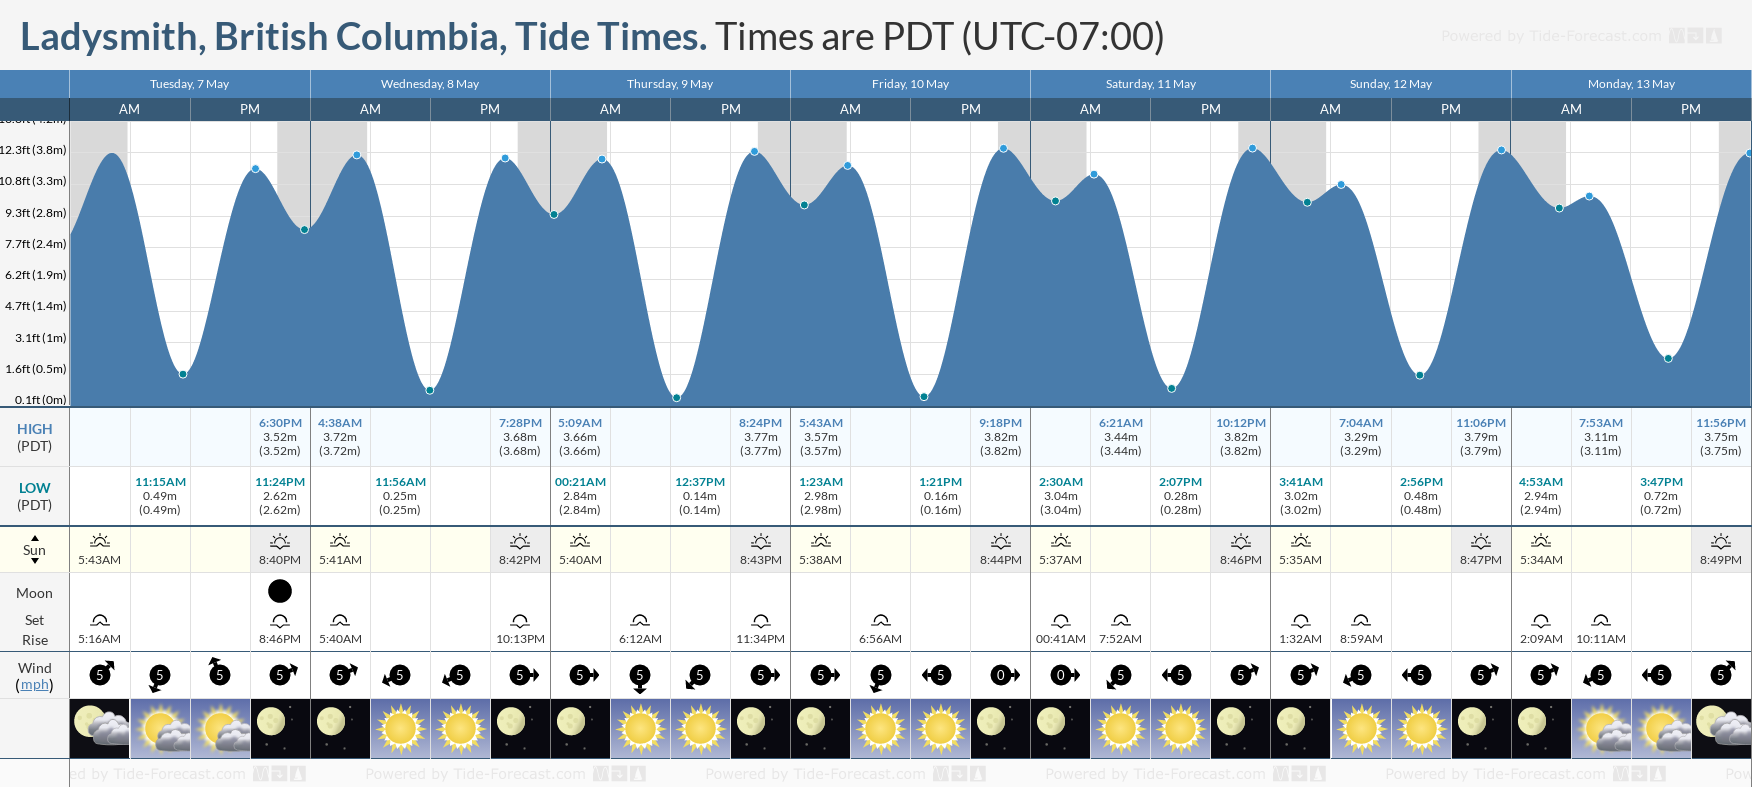 Ladysmith, British Columbia Tide Chart including high and low tide tide times for the next 7 days